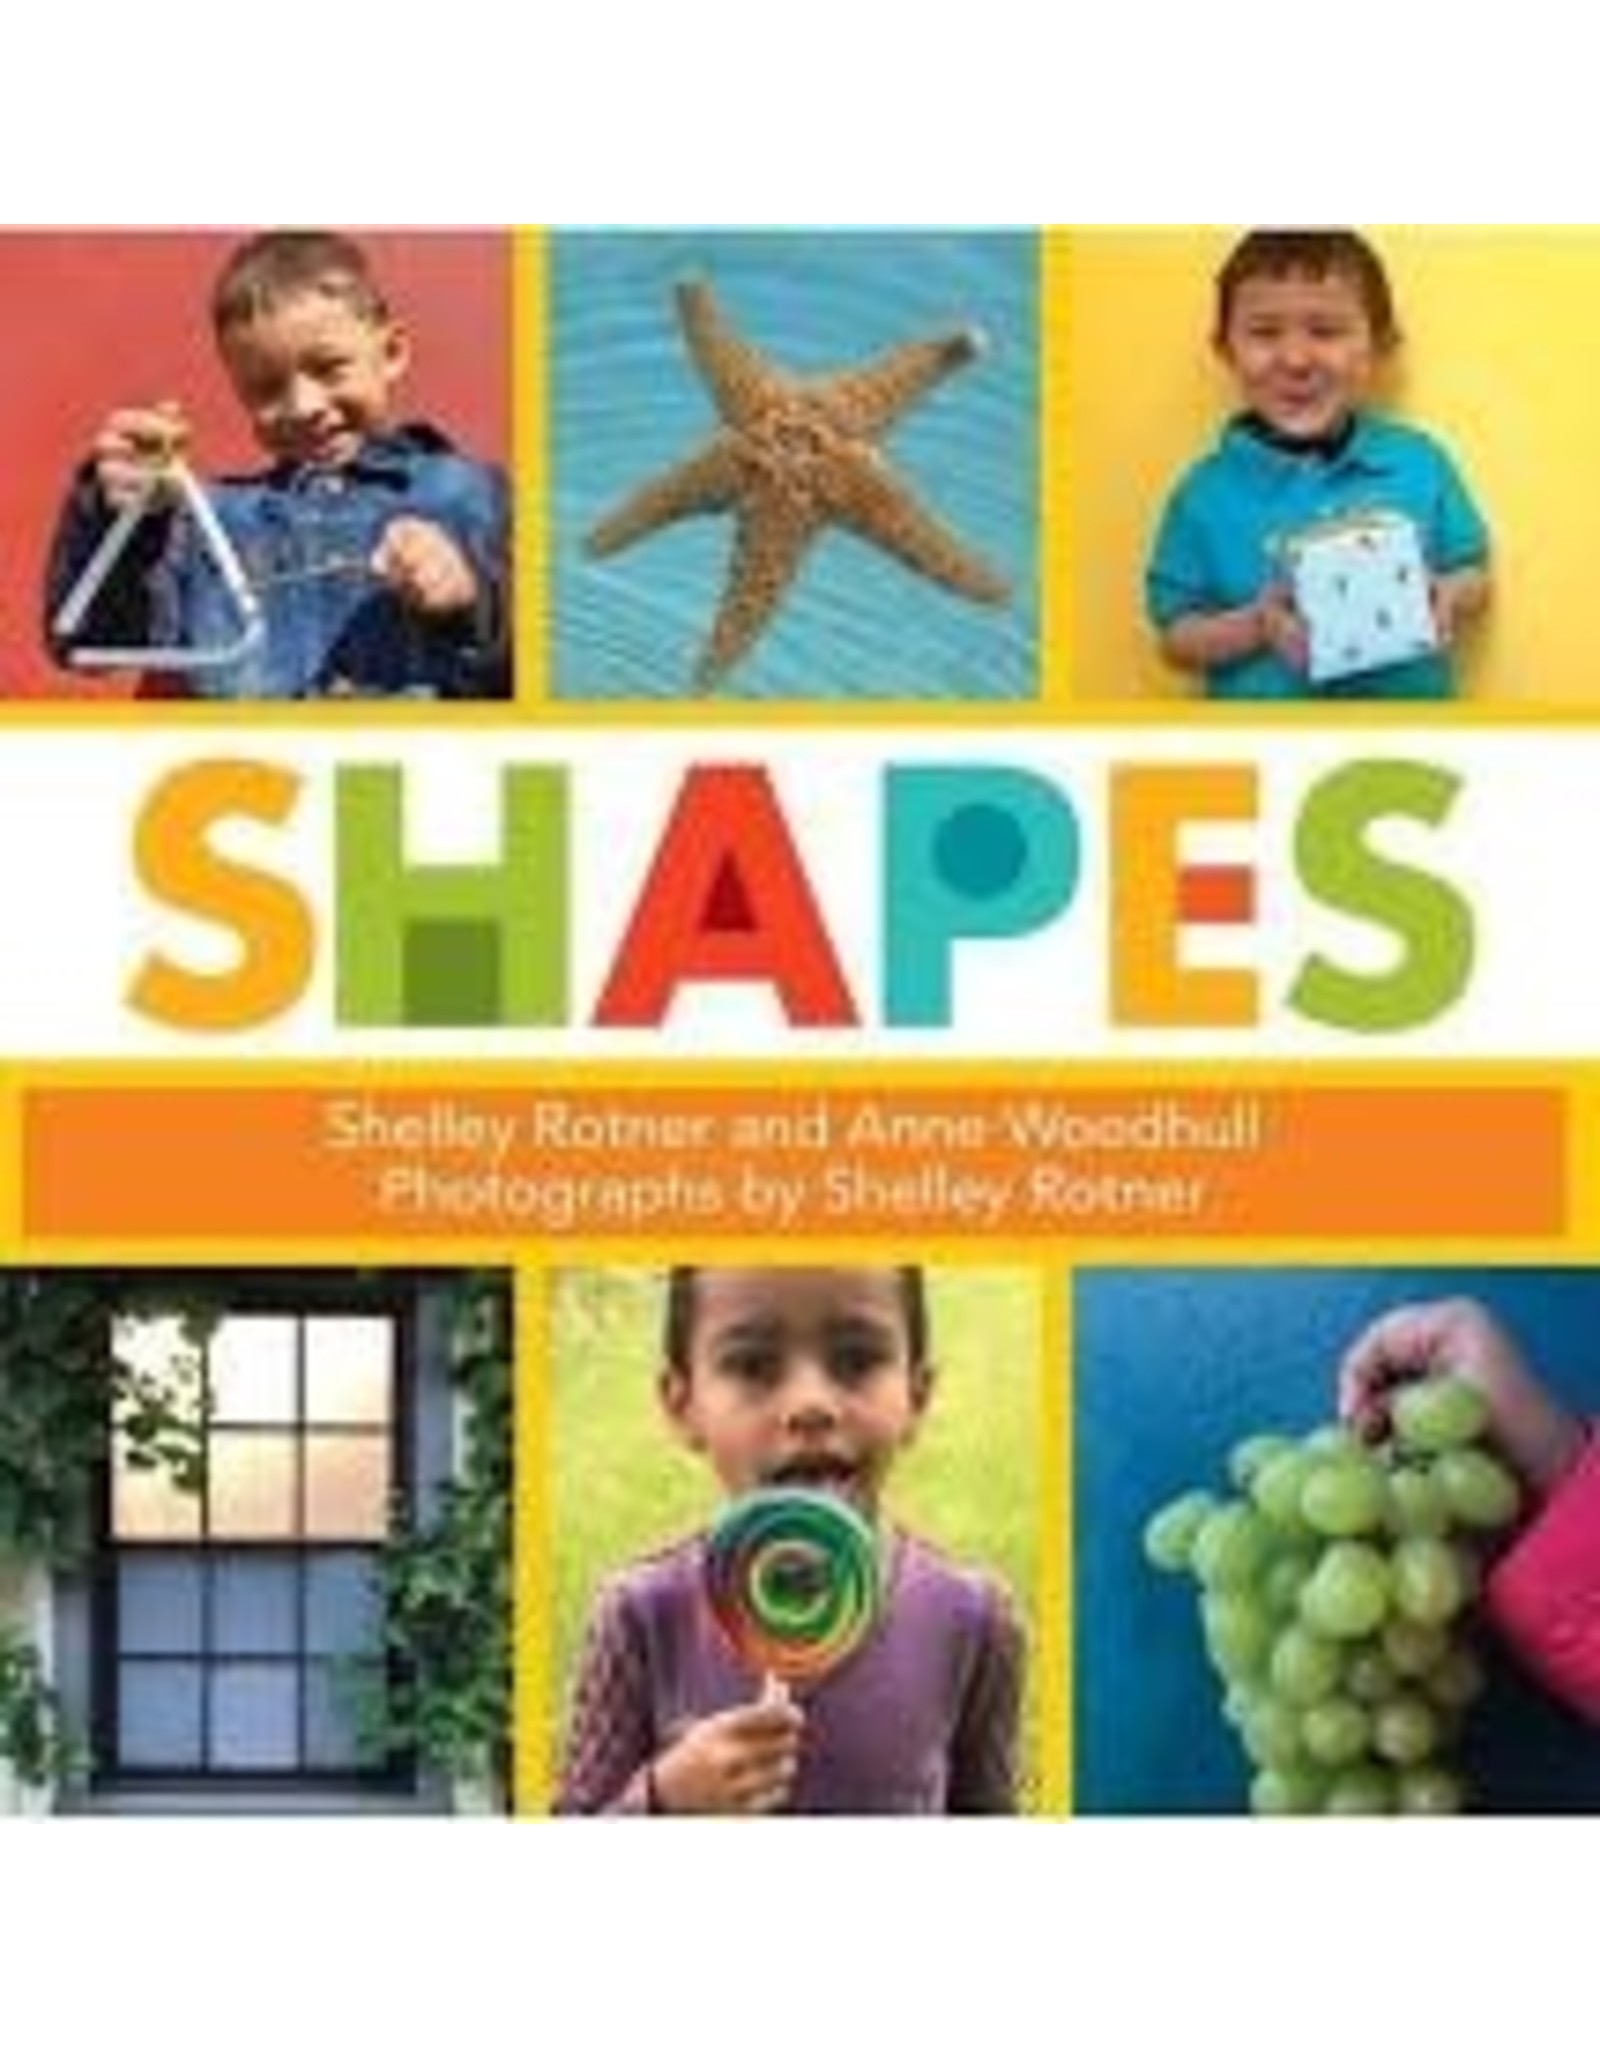 Shapes - Shelley Rotner and Anne Woodhull